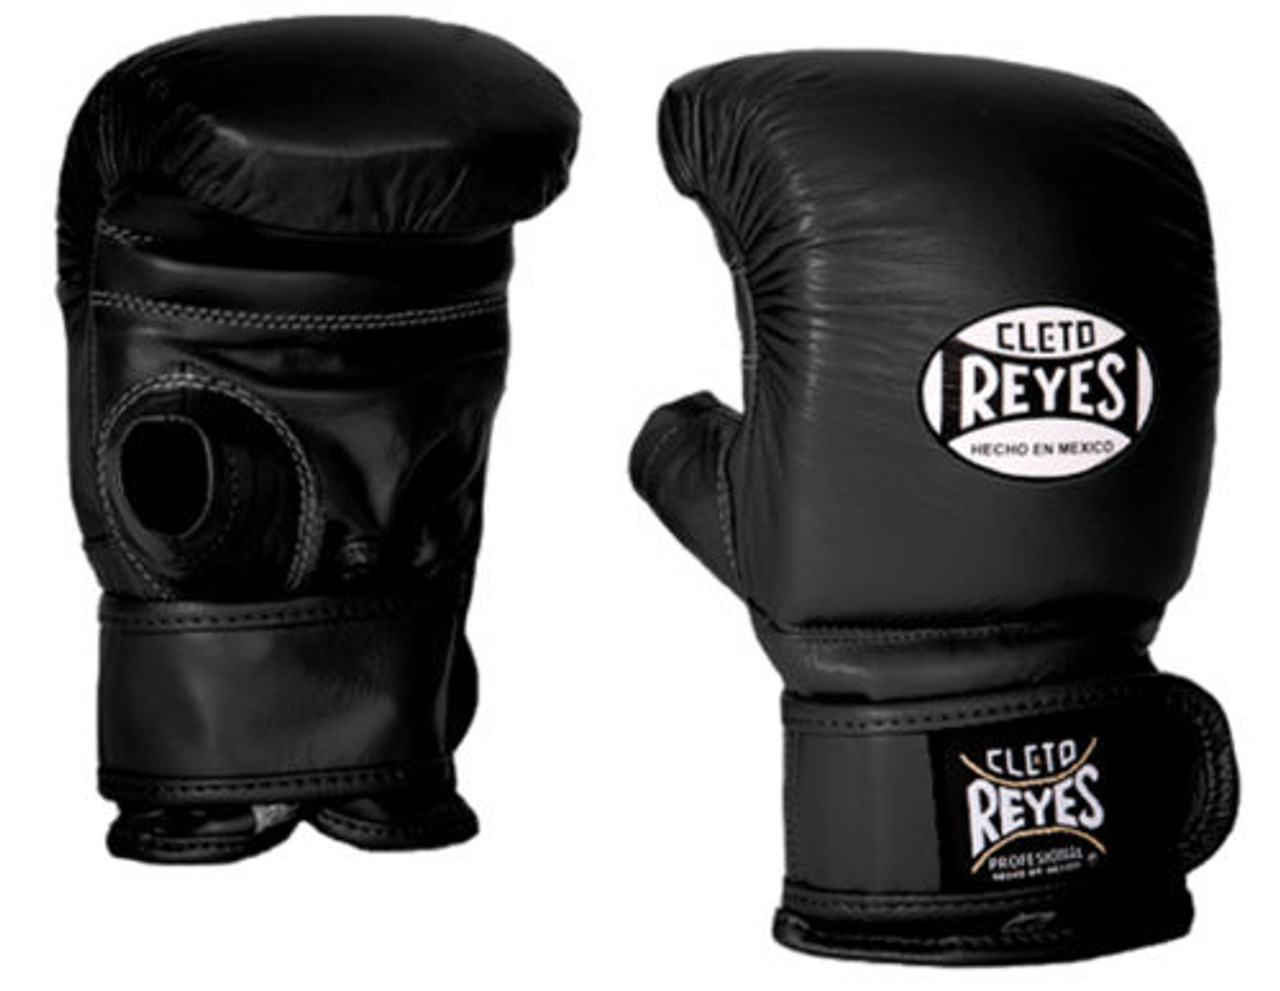 Cleto Reyes Boxing Bag Gloves with Hook and Loop Closure